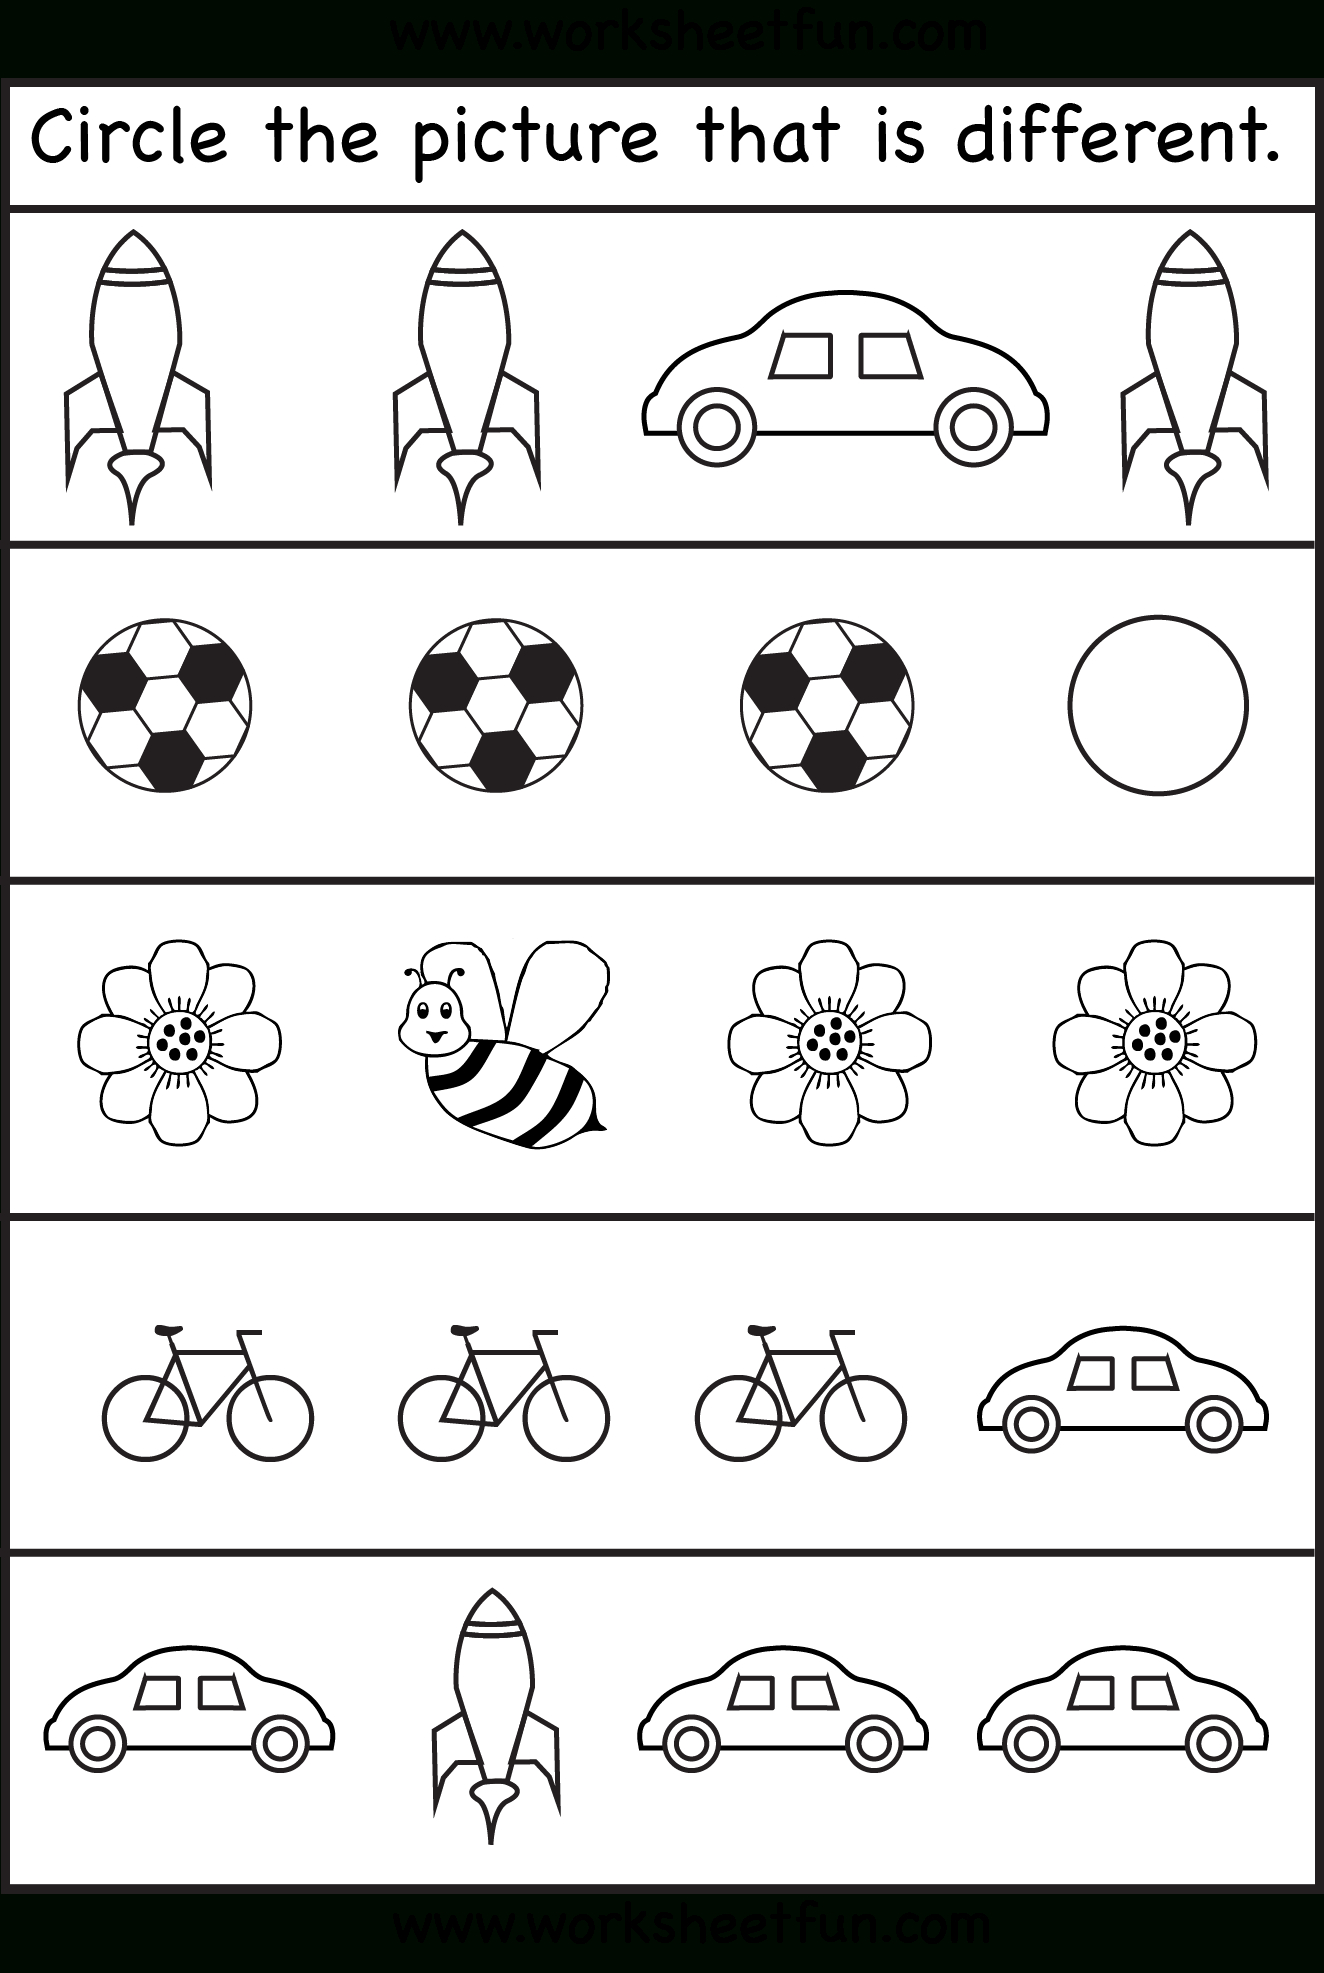 Circle The Picture That Is Different - 4 Worksheets | Printable - Free Printable Learning Pages For Toddlers